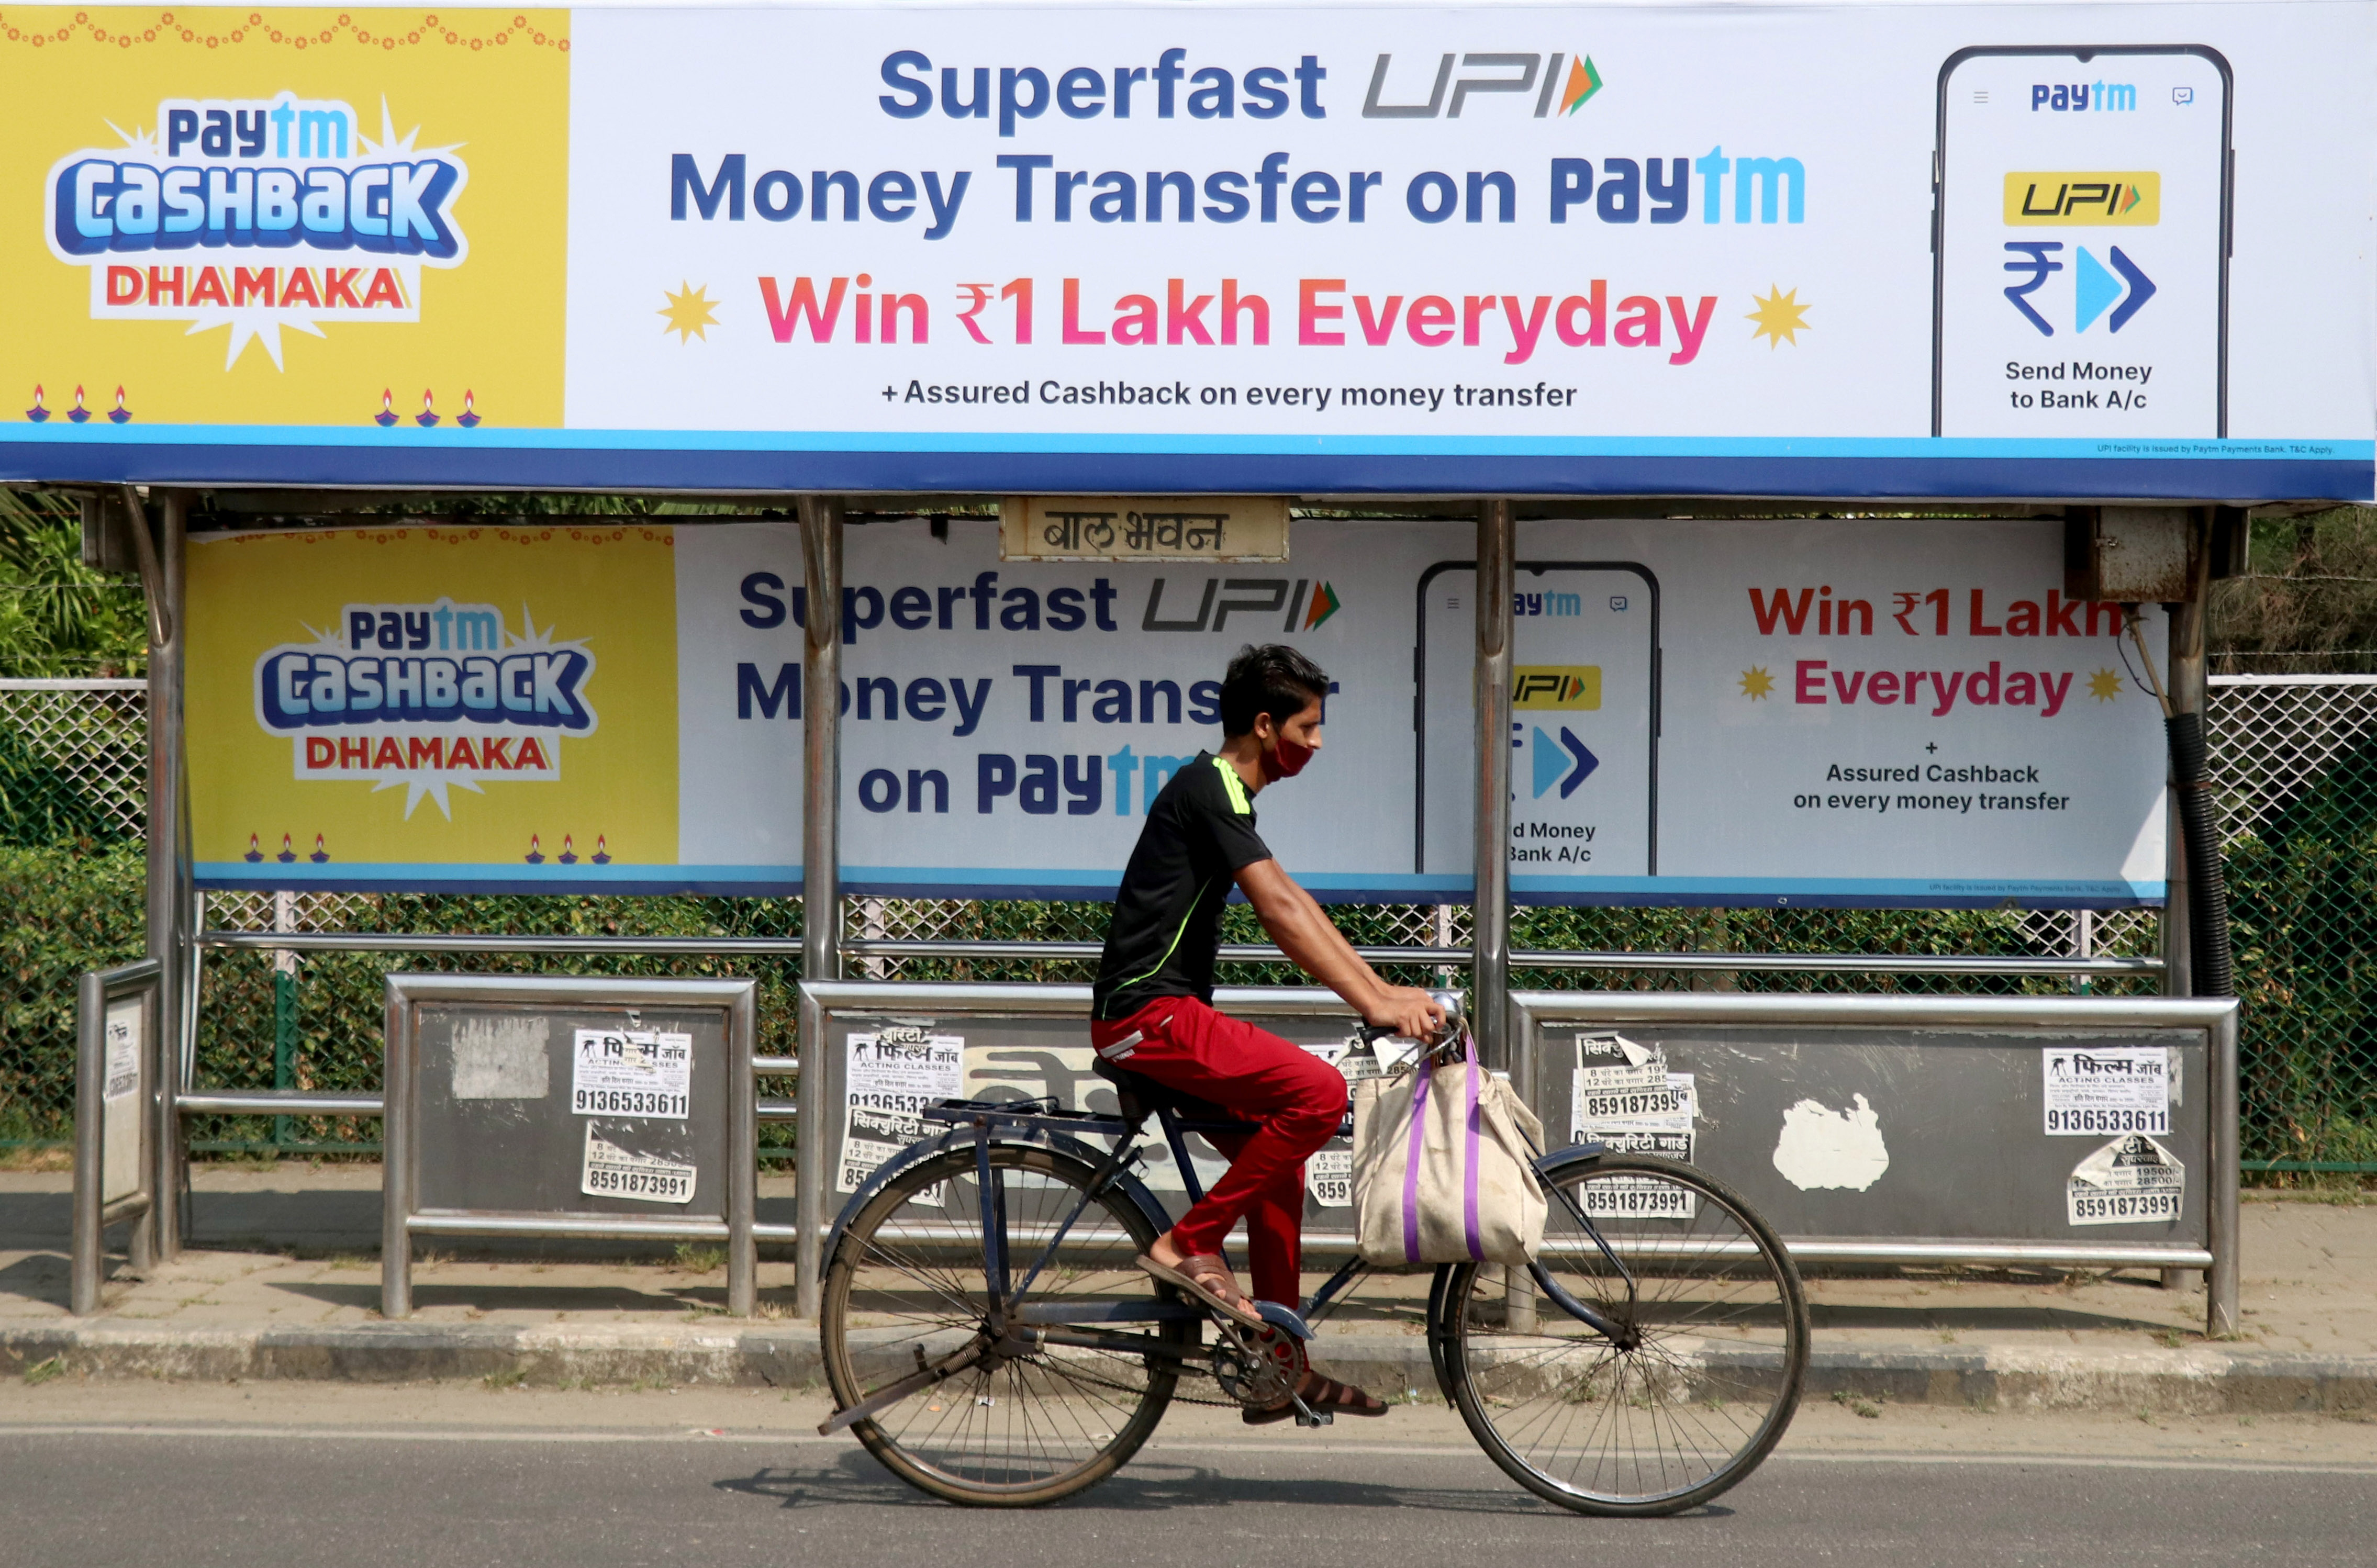 Man rides a bicycle past a bus stop with Paytm advertisements in Mumbai